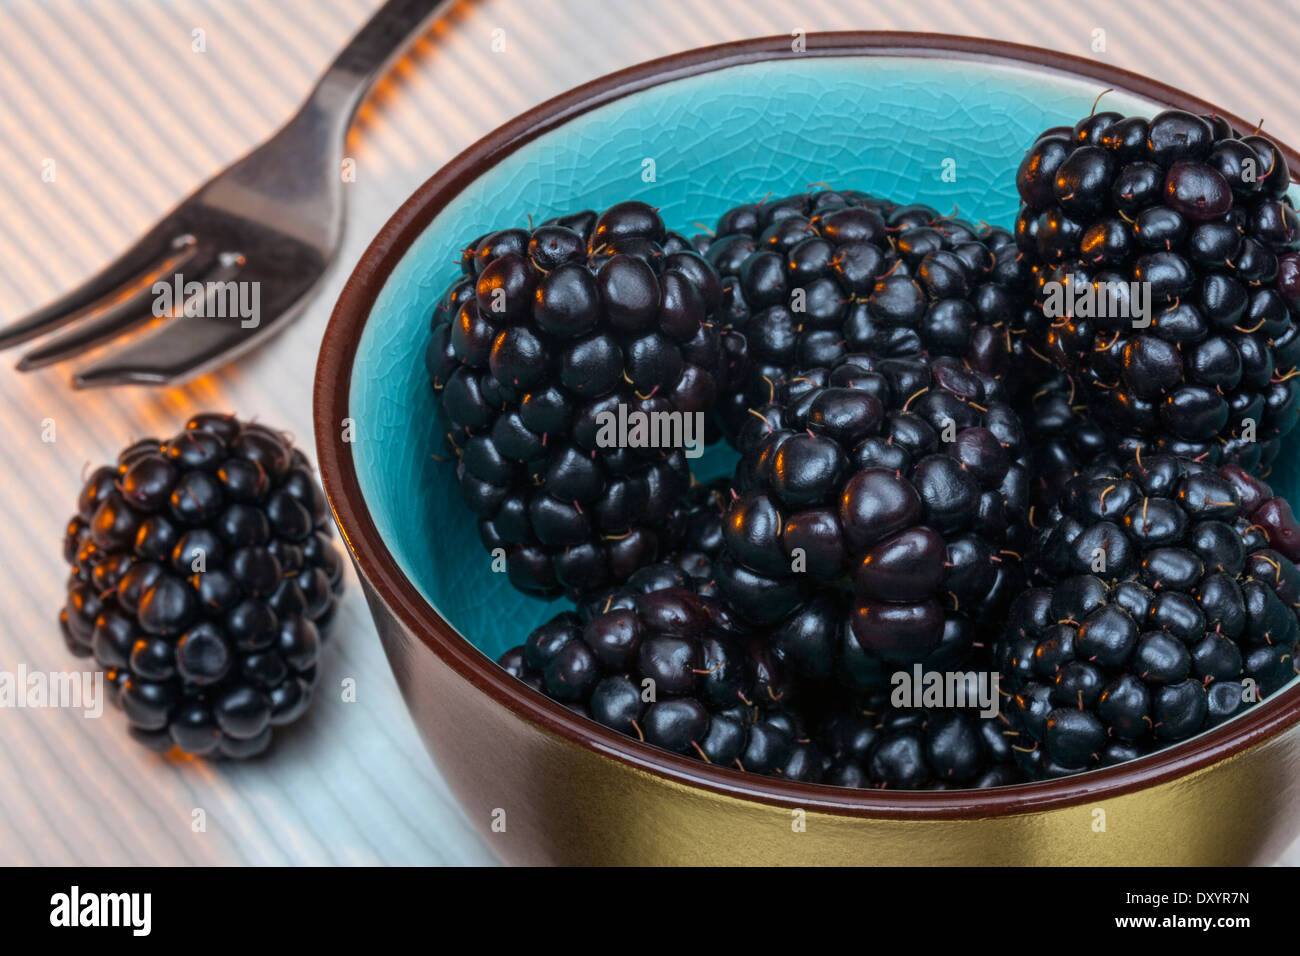 Blackberries are an edible soft fruit consisting of a cluster of soft purple-black drupelets. Stock Photo